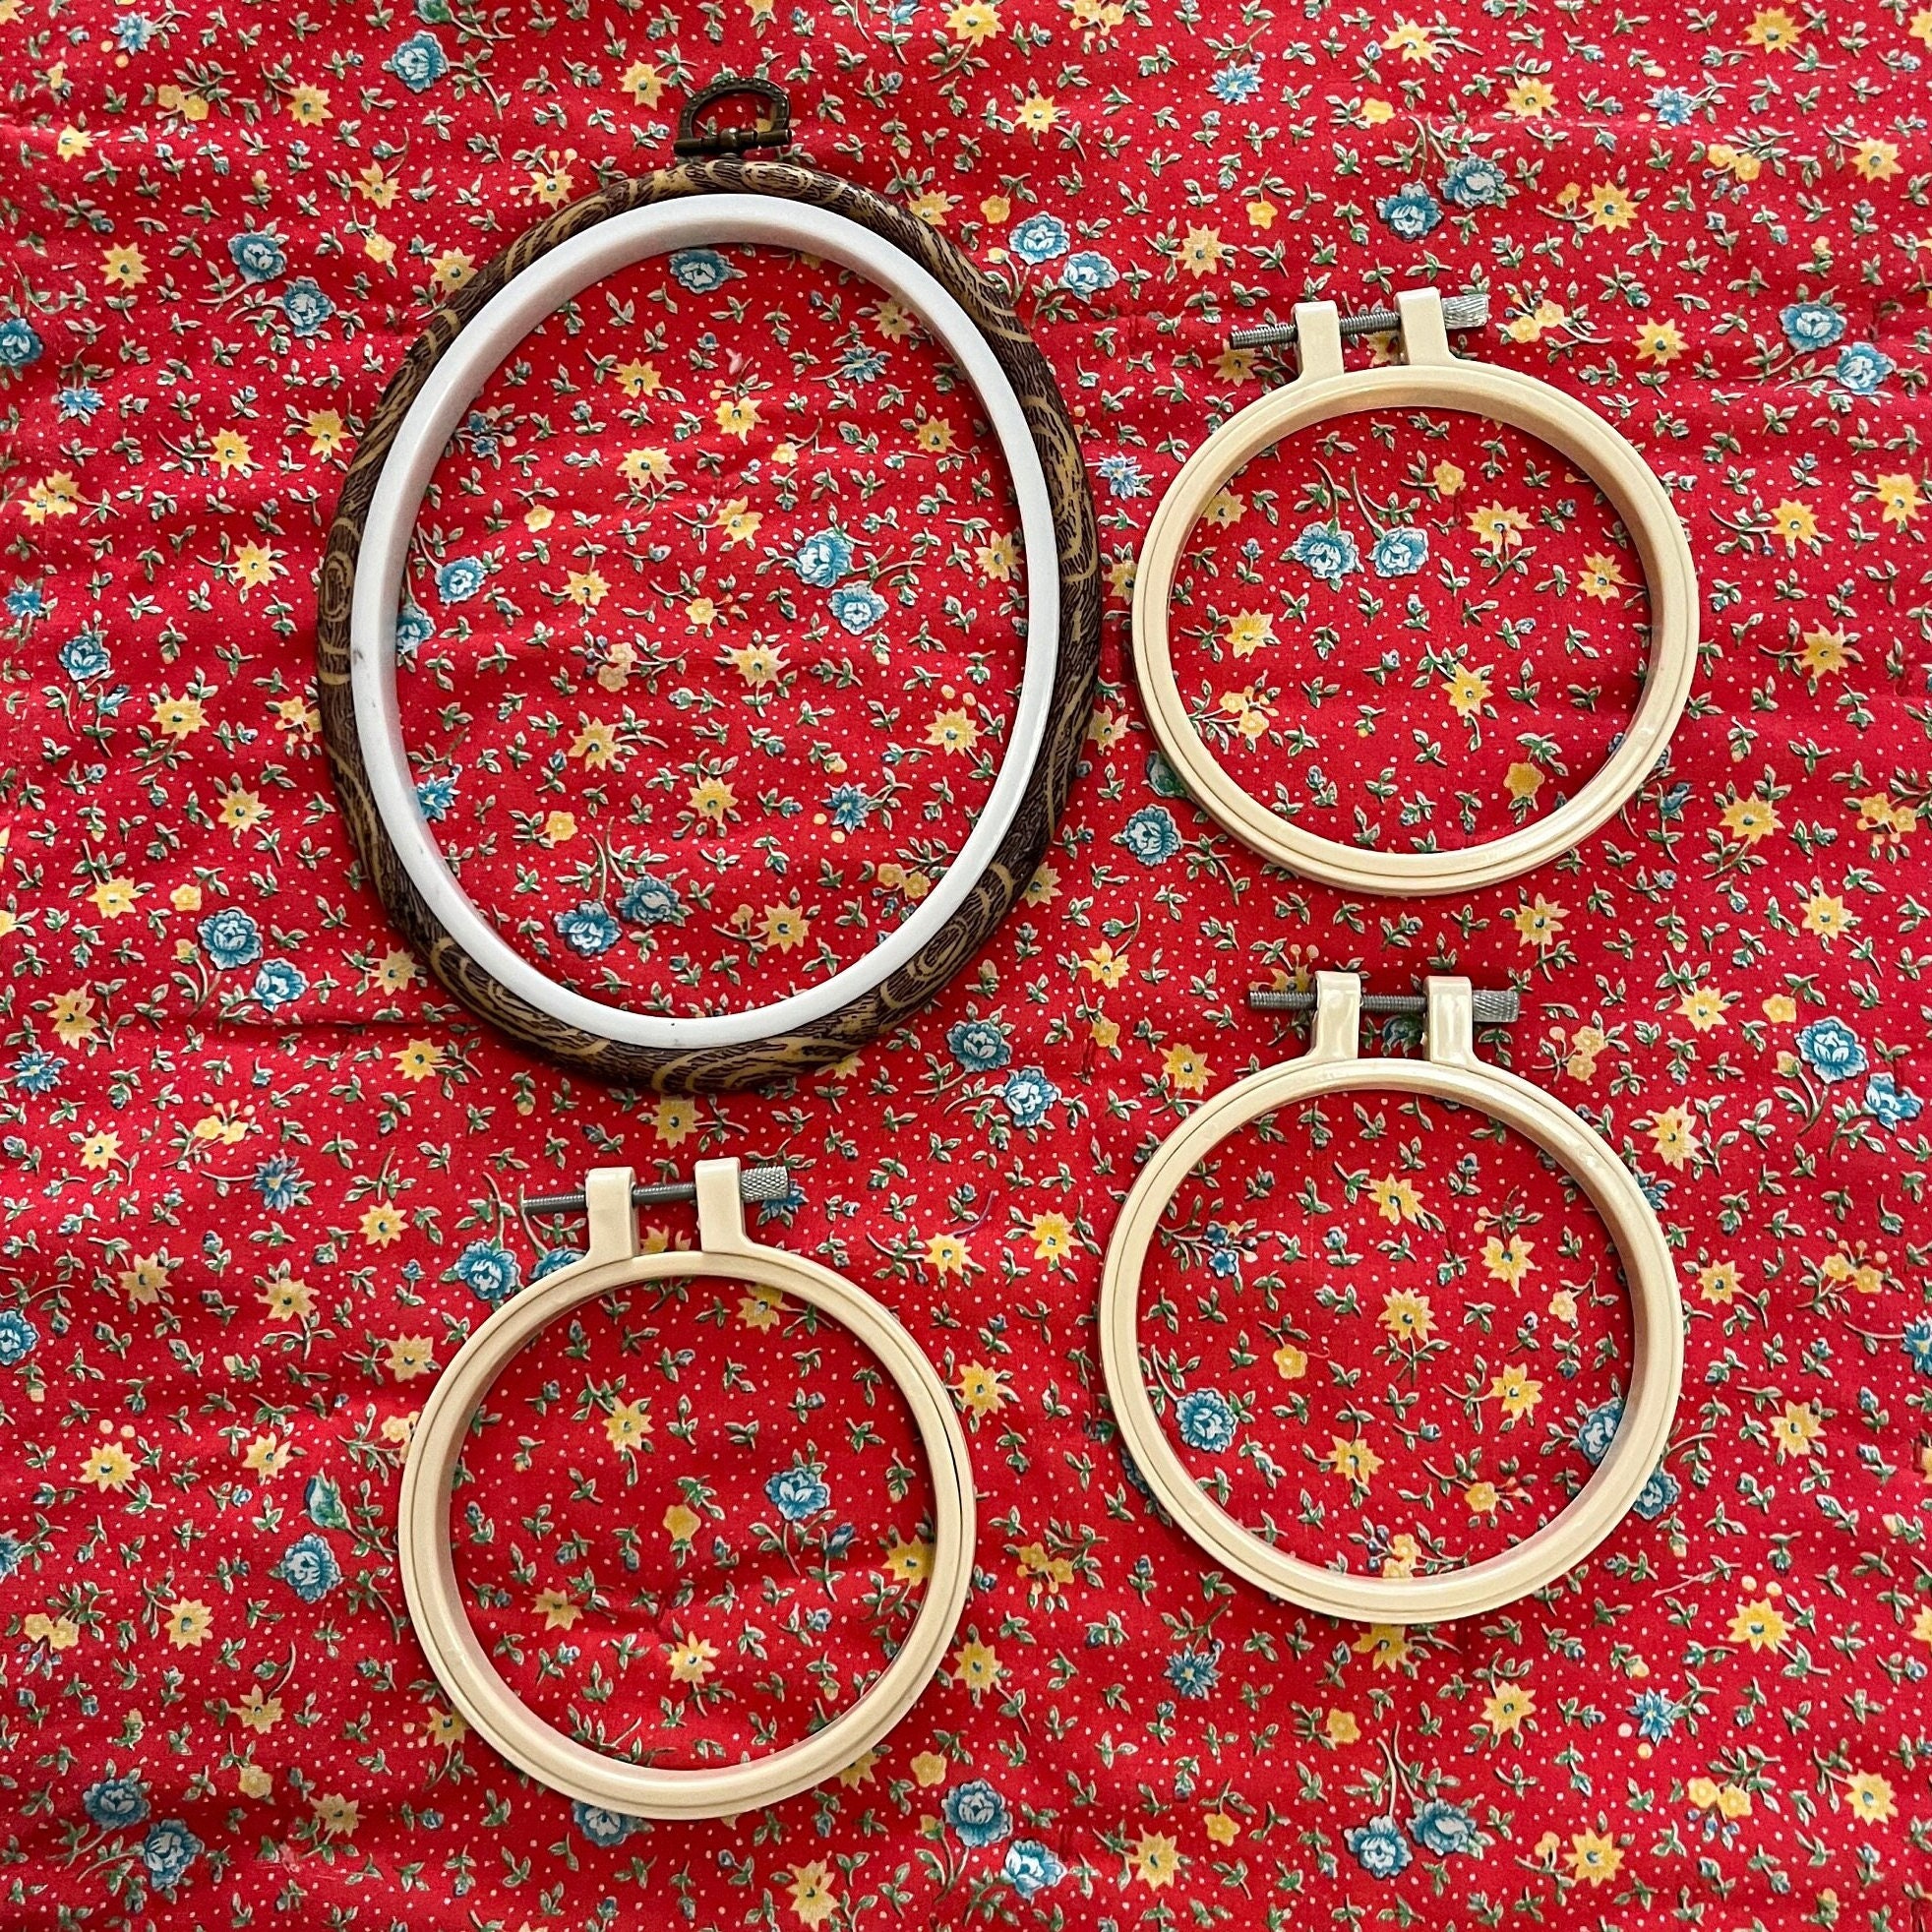 1 Inch Gold Metal Rings Hoops for Crafts Bulk Wholesale 100 